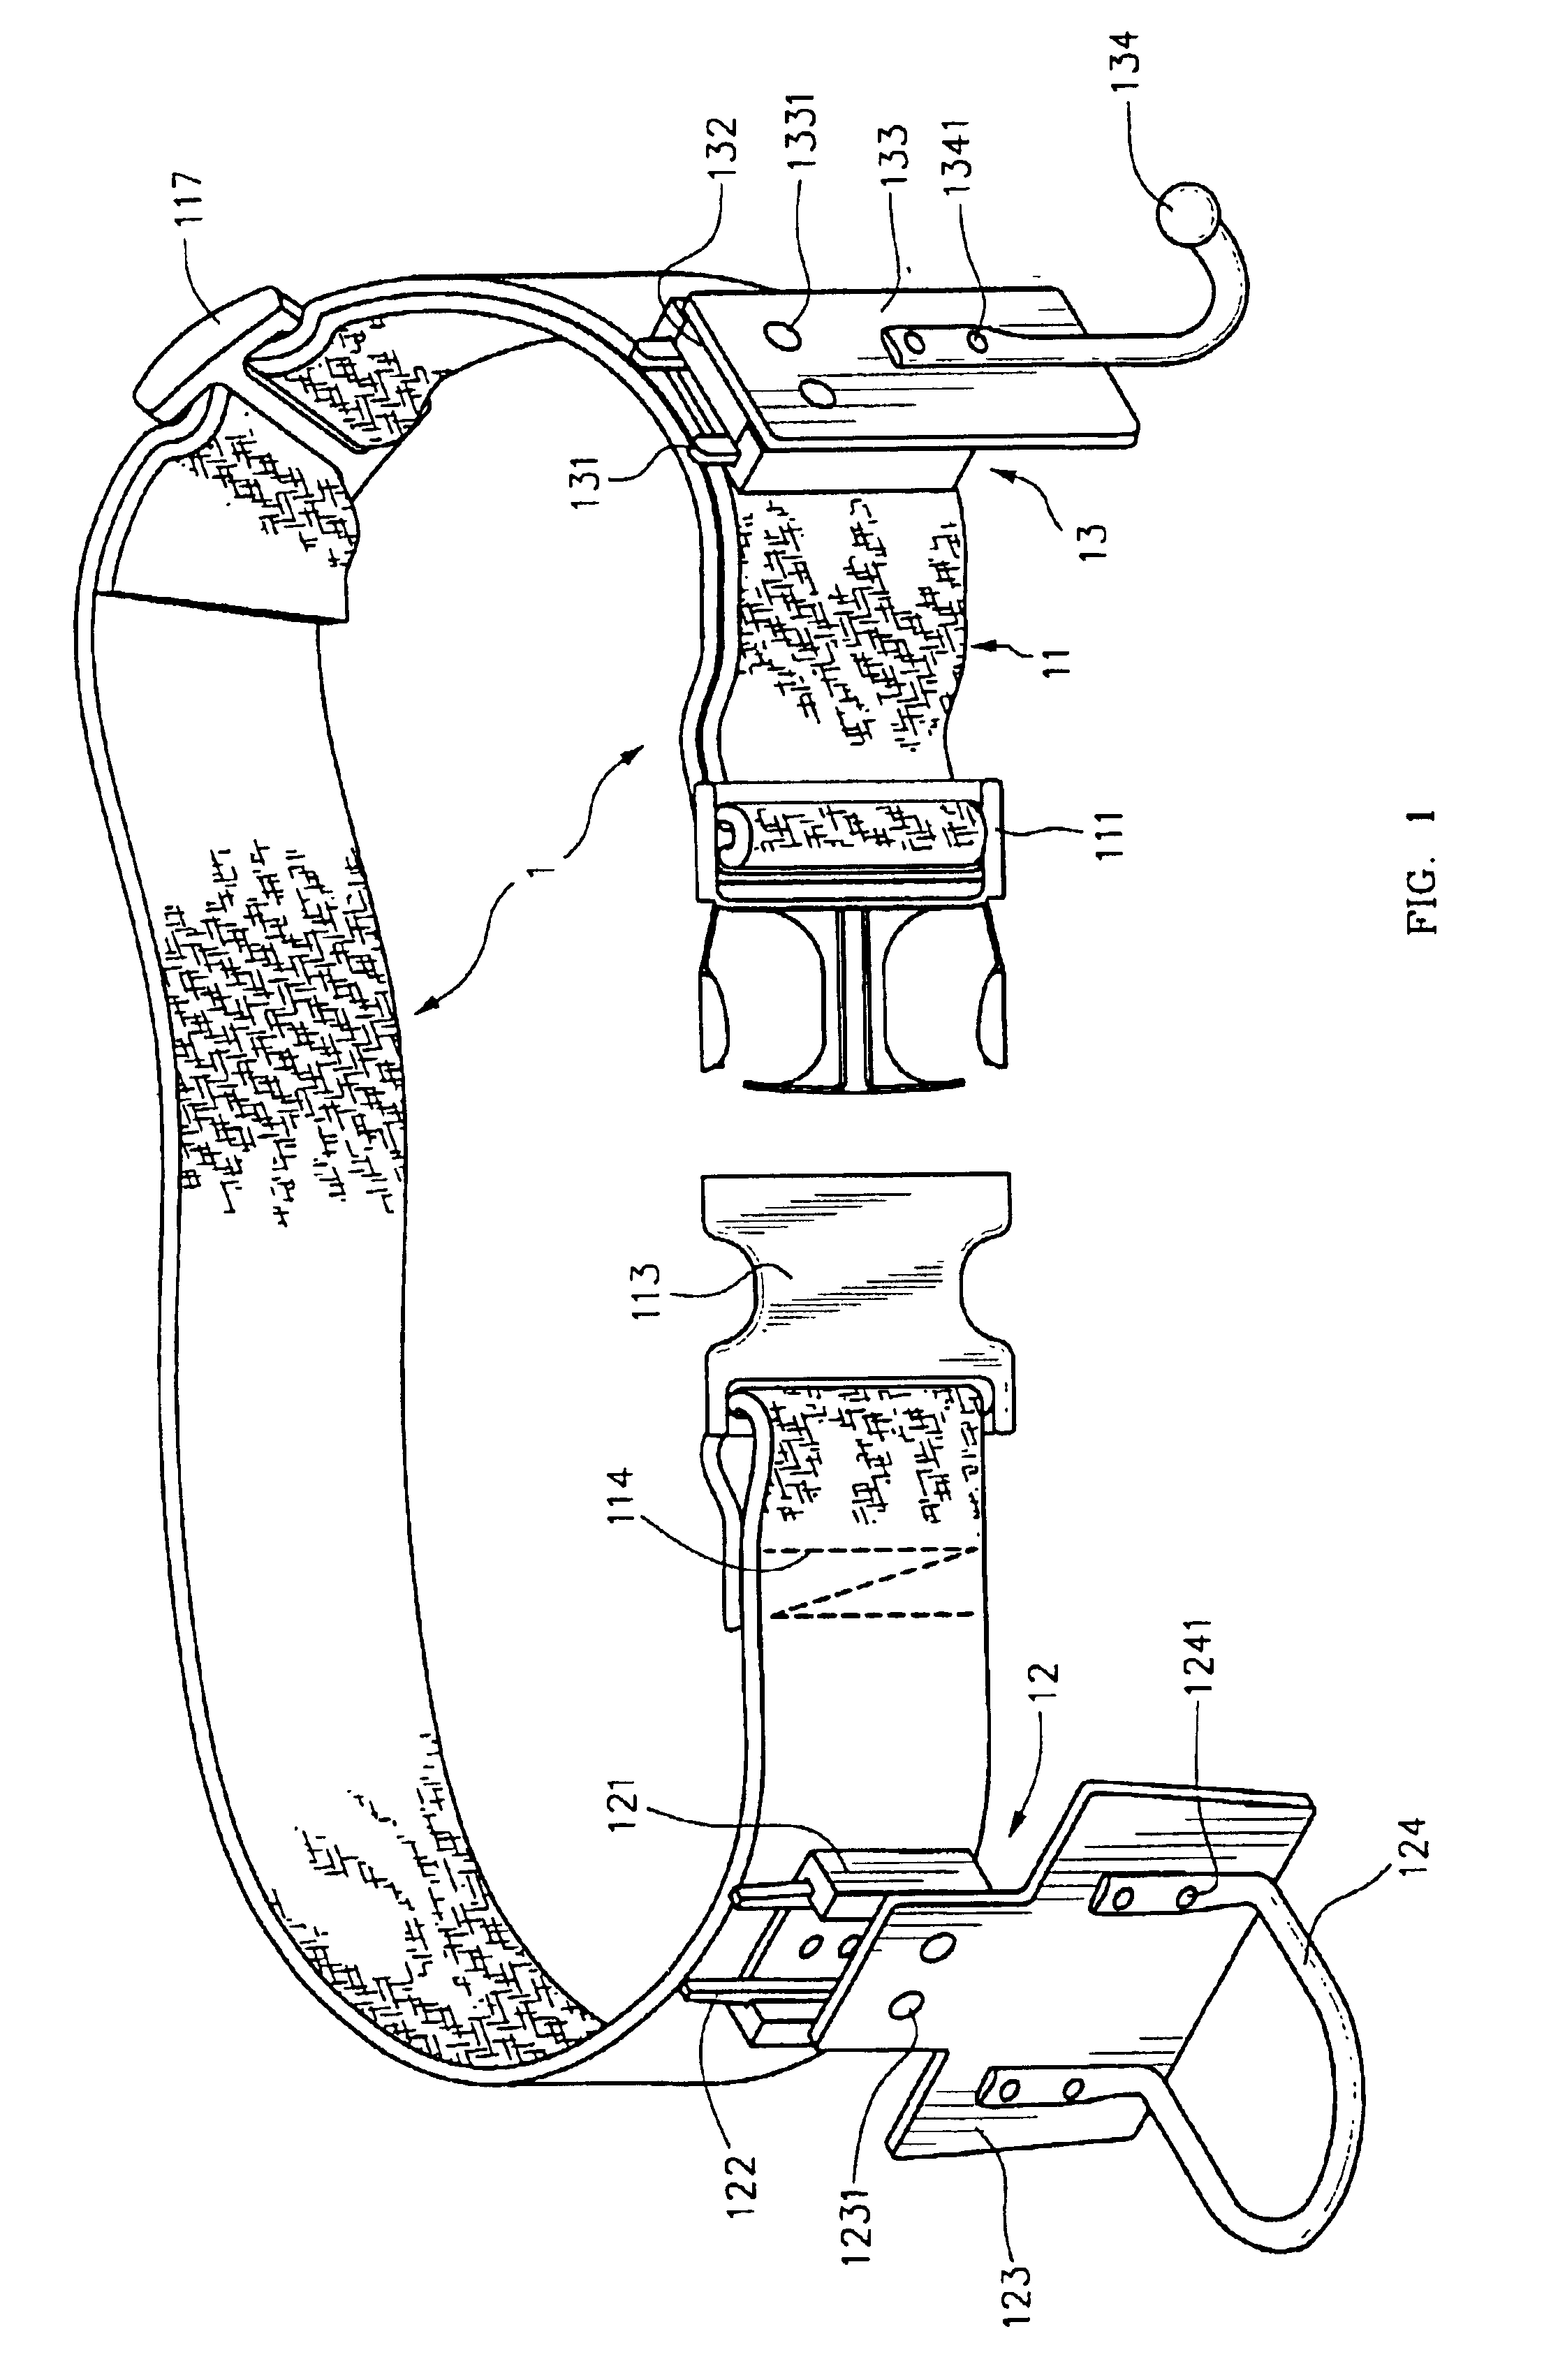 Tool belt with spaced receiver blocks selectively receiving both complimentary tool holders and tools